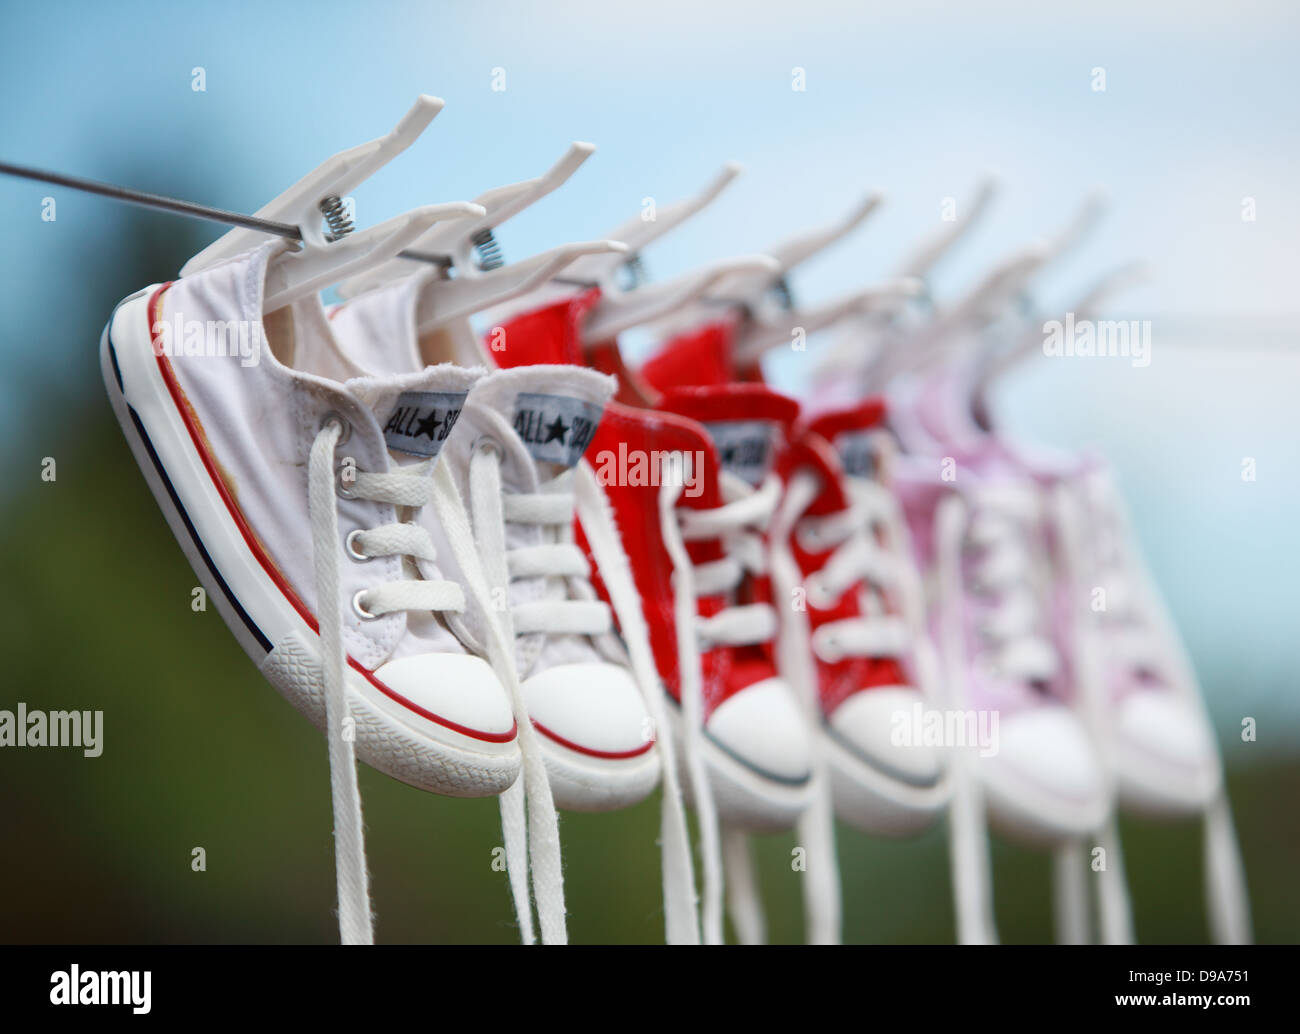 Converse Pumps Trainers on a Washing LIne Stock Photo